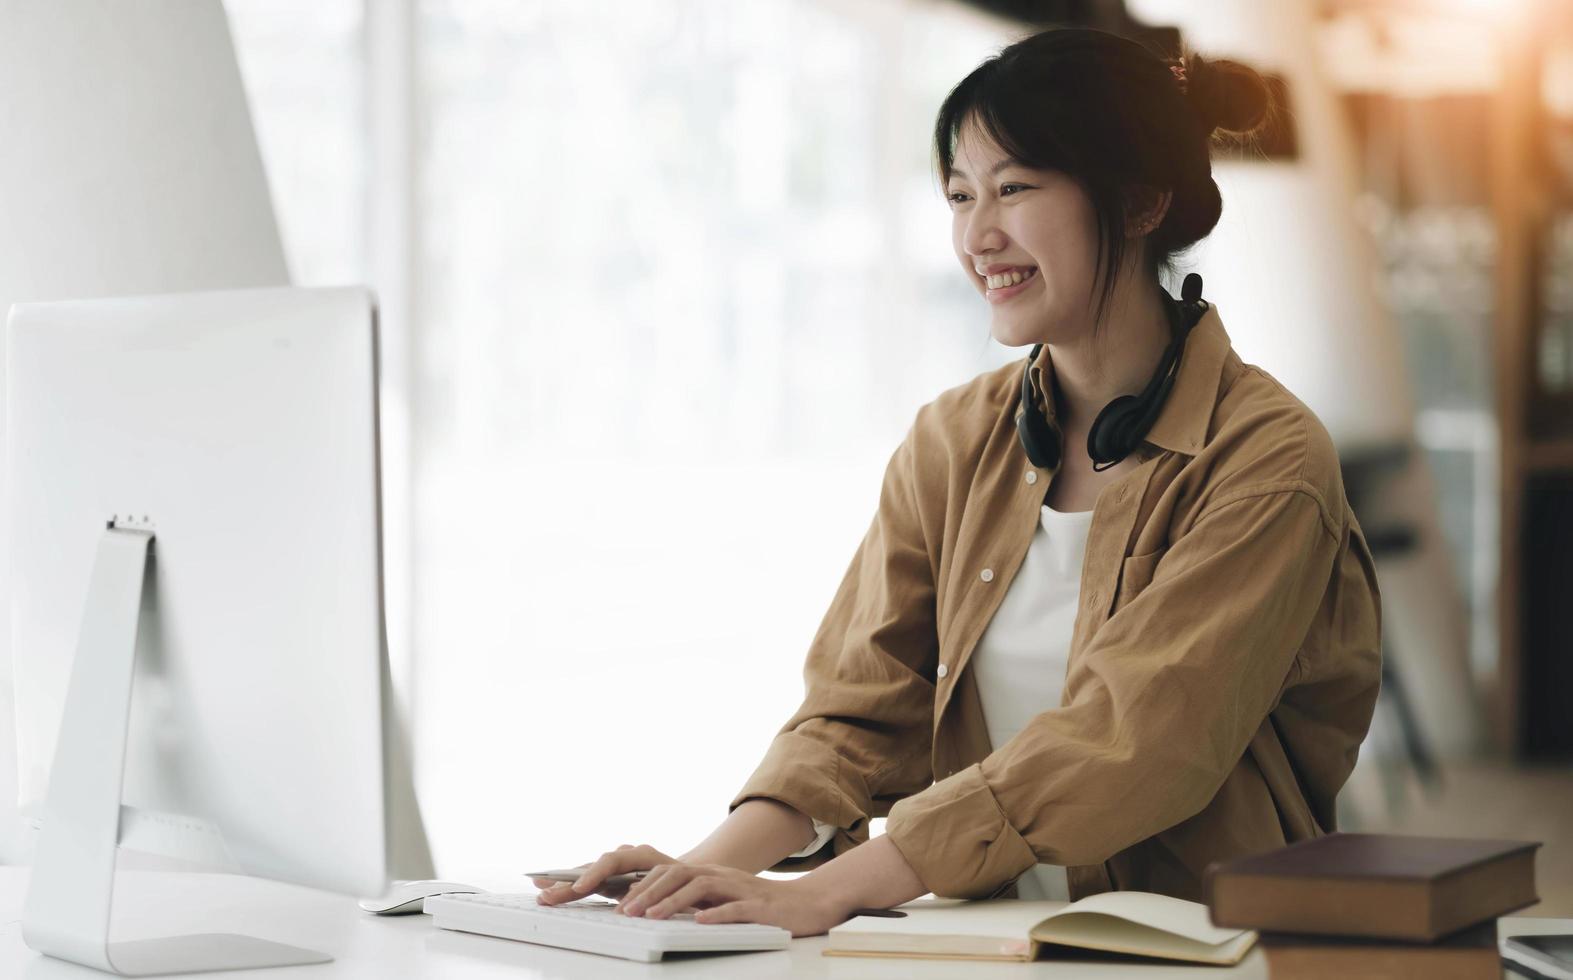 Head shot portrait smiling asian woman wearing headphones posing for photo at workplace, happy excited female wearing headset looking at laptop, sitting at desk with laptop, making video call